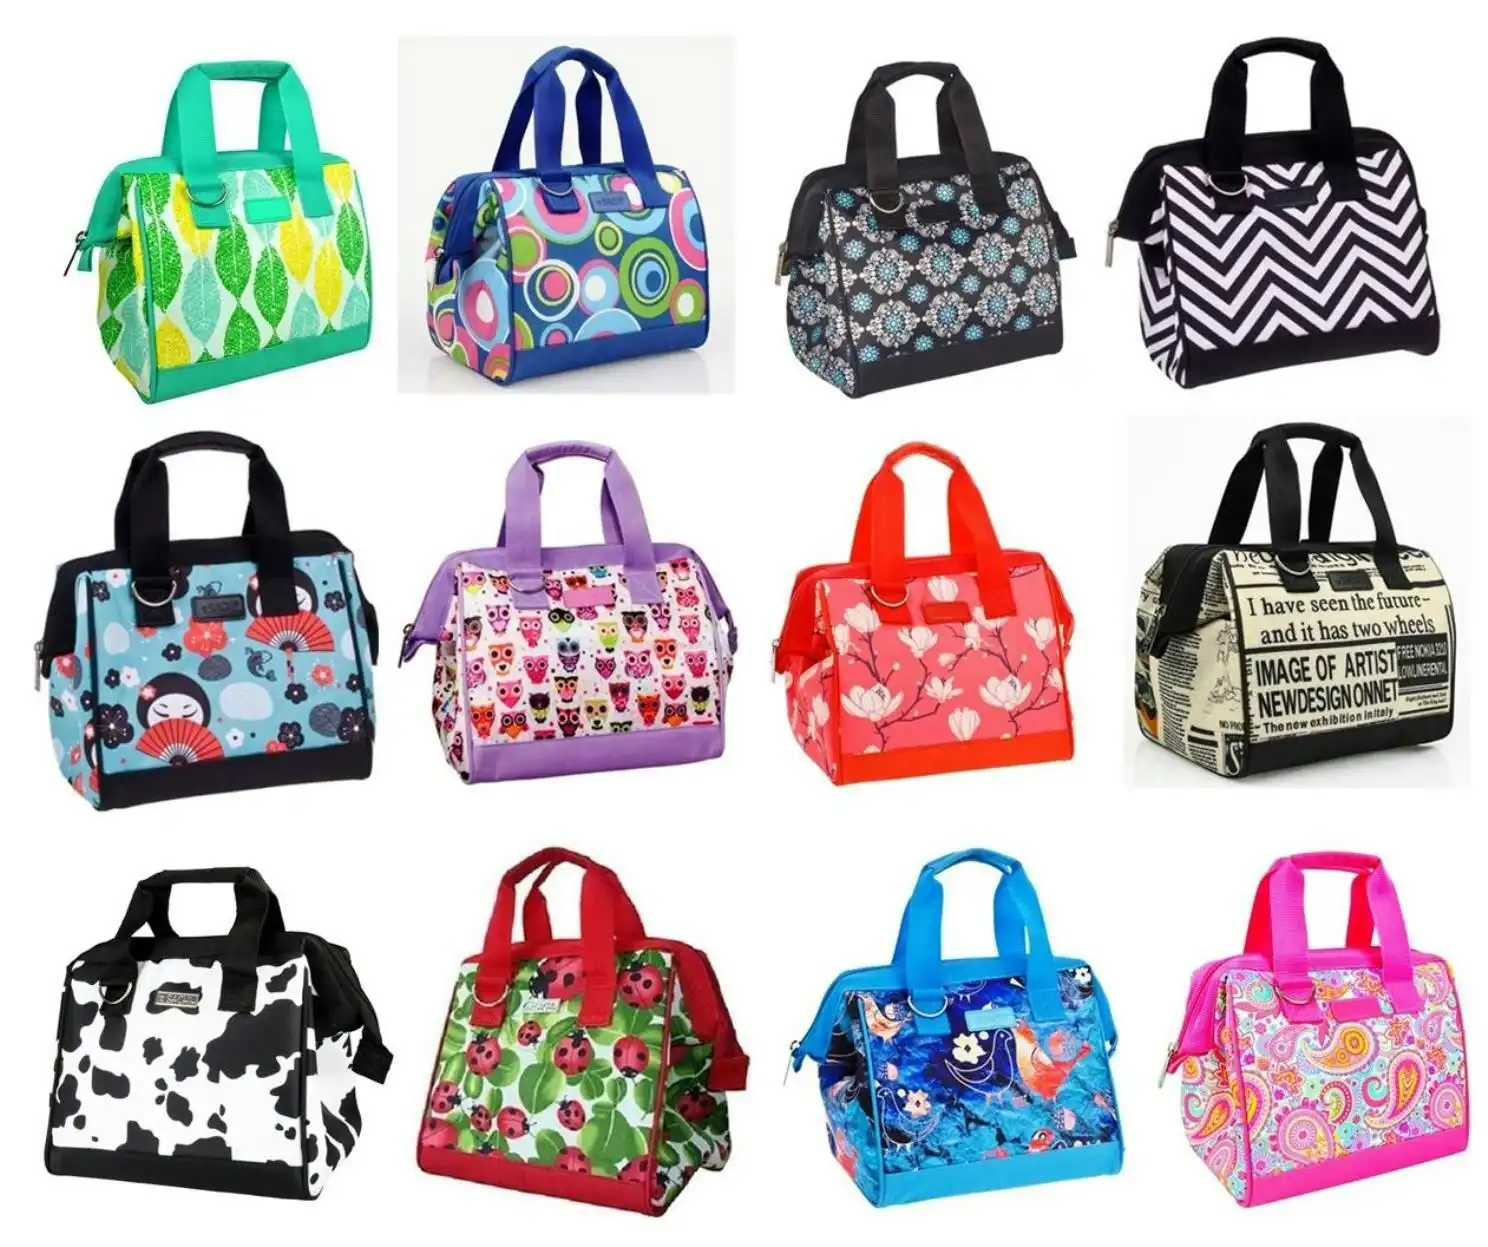 Sachi Insulated Lunch Bag "Style 34"